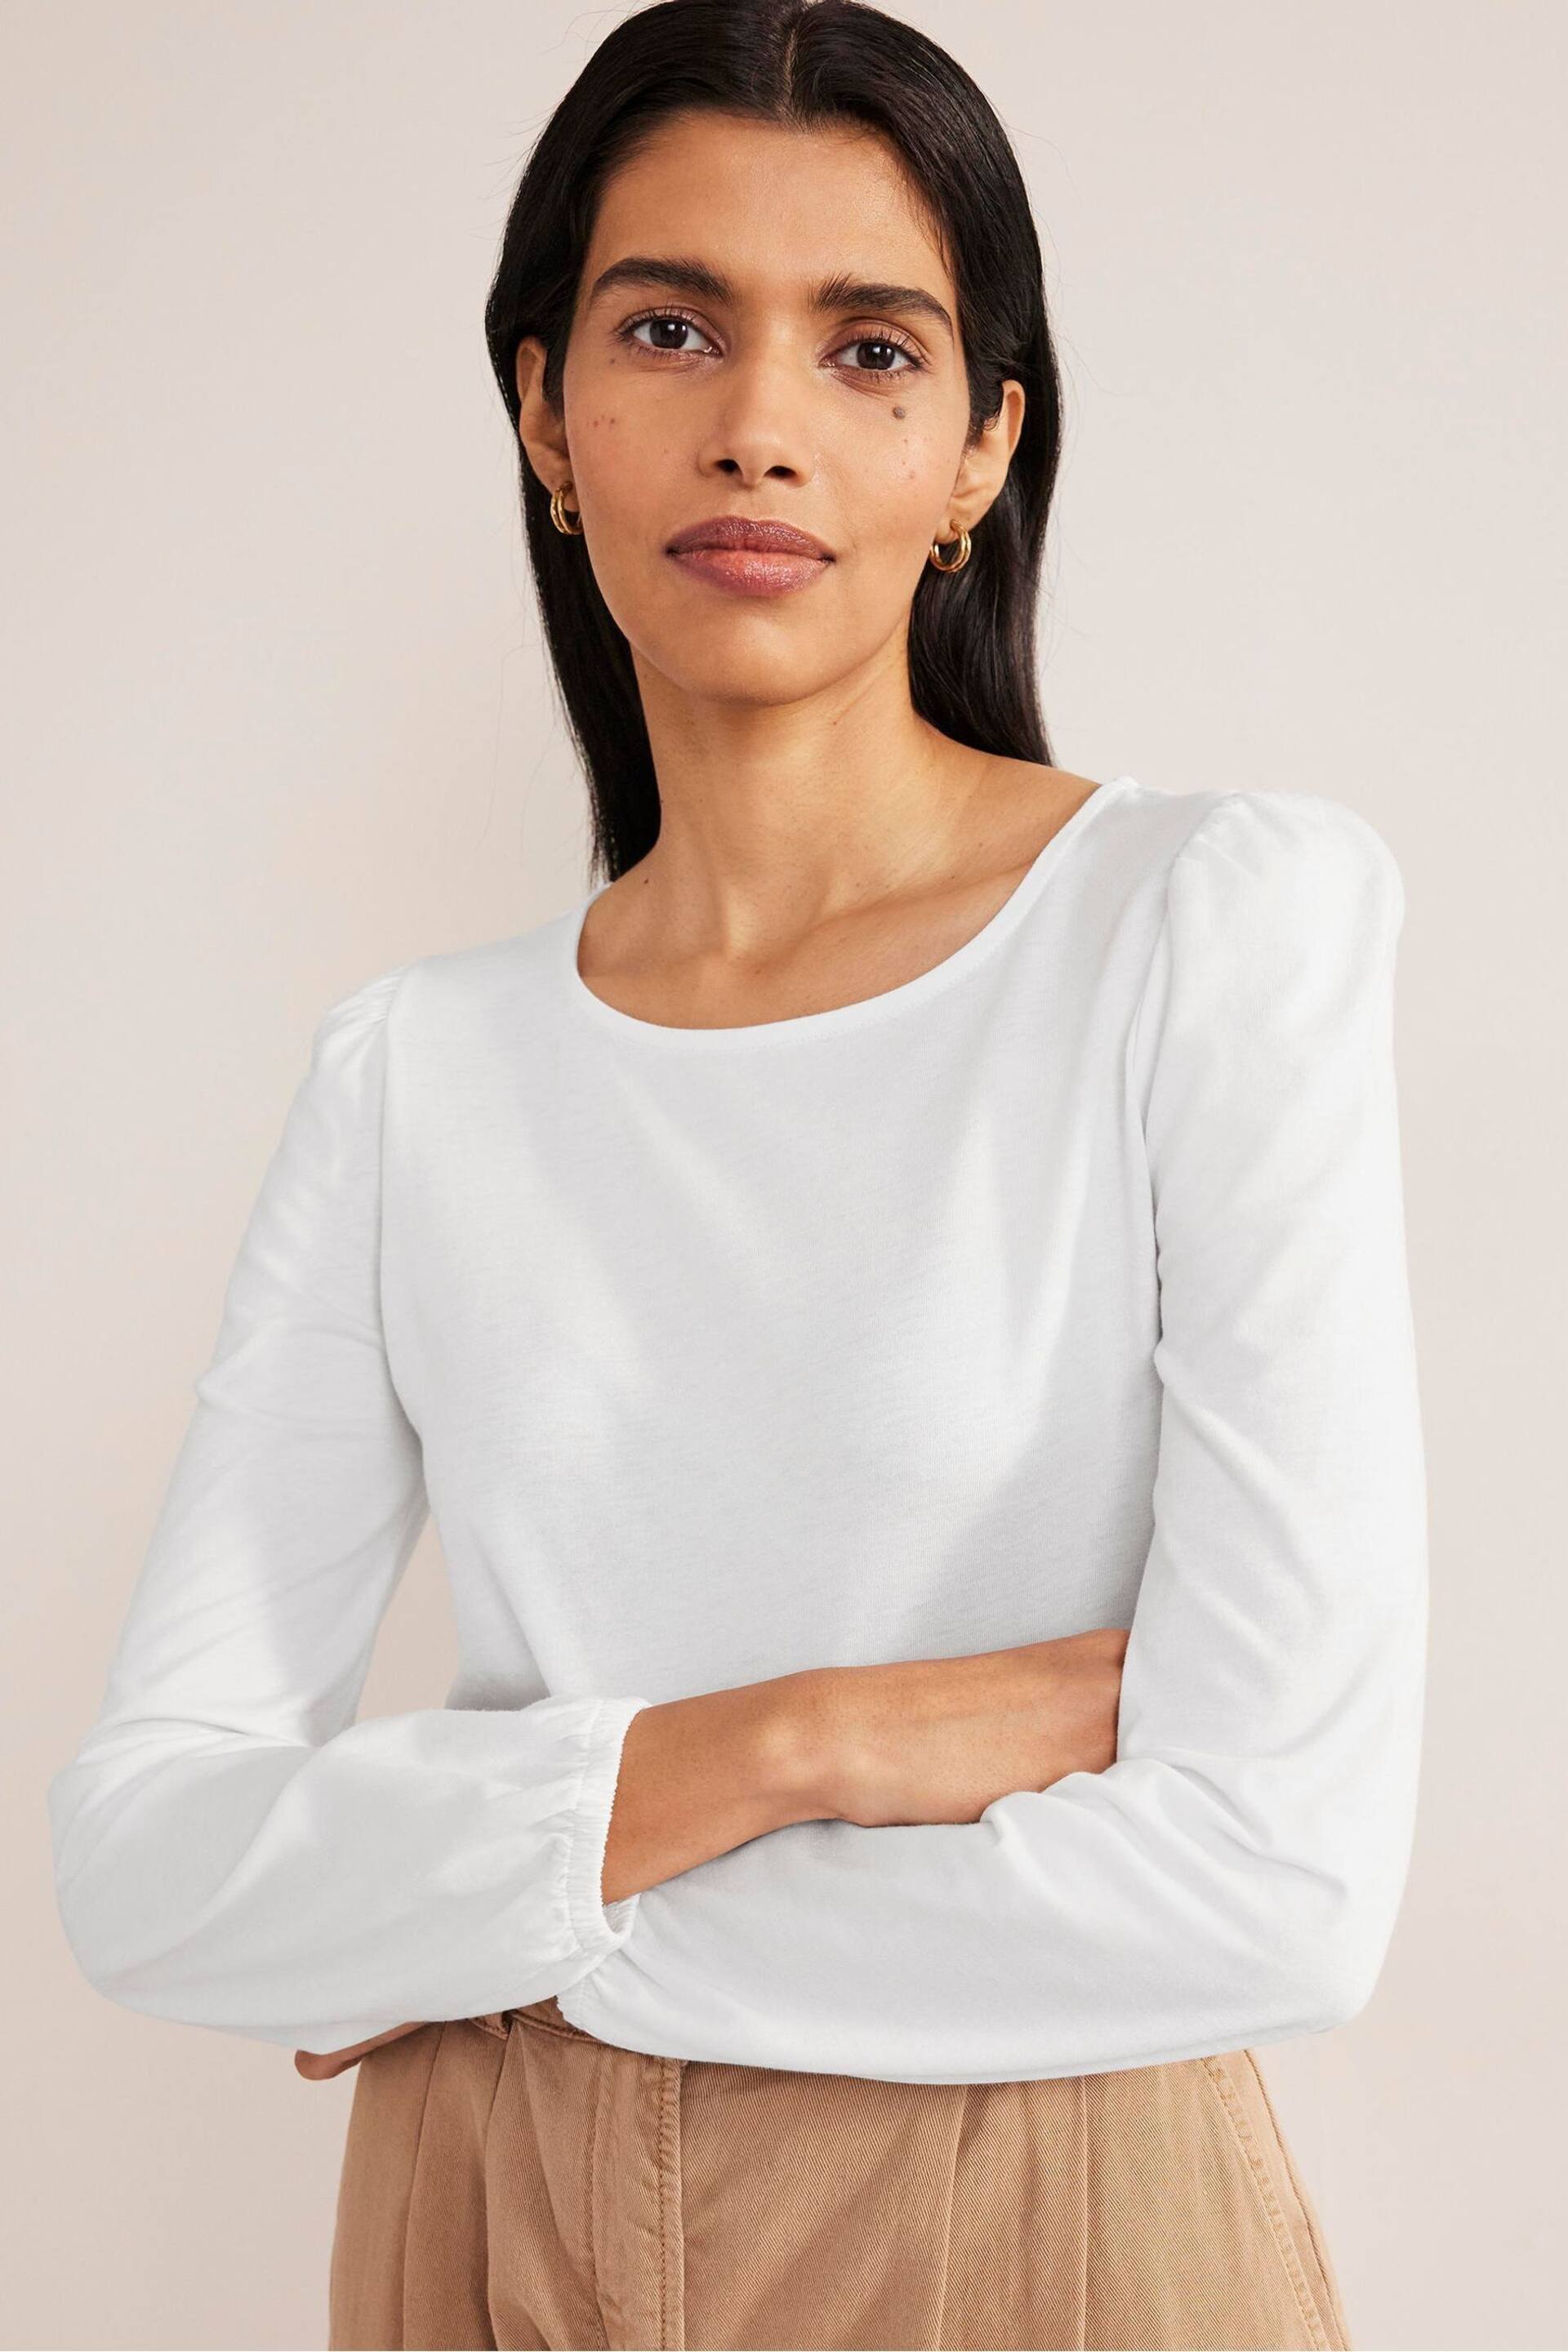 Boden White Supersoft Long Sleeve Top - Image 3 of 5